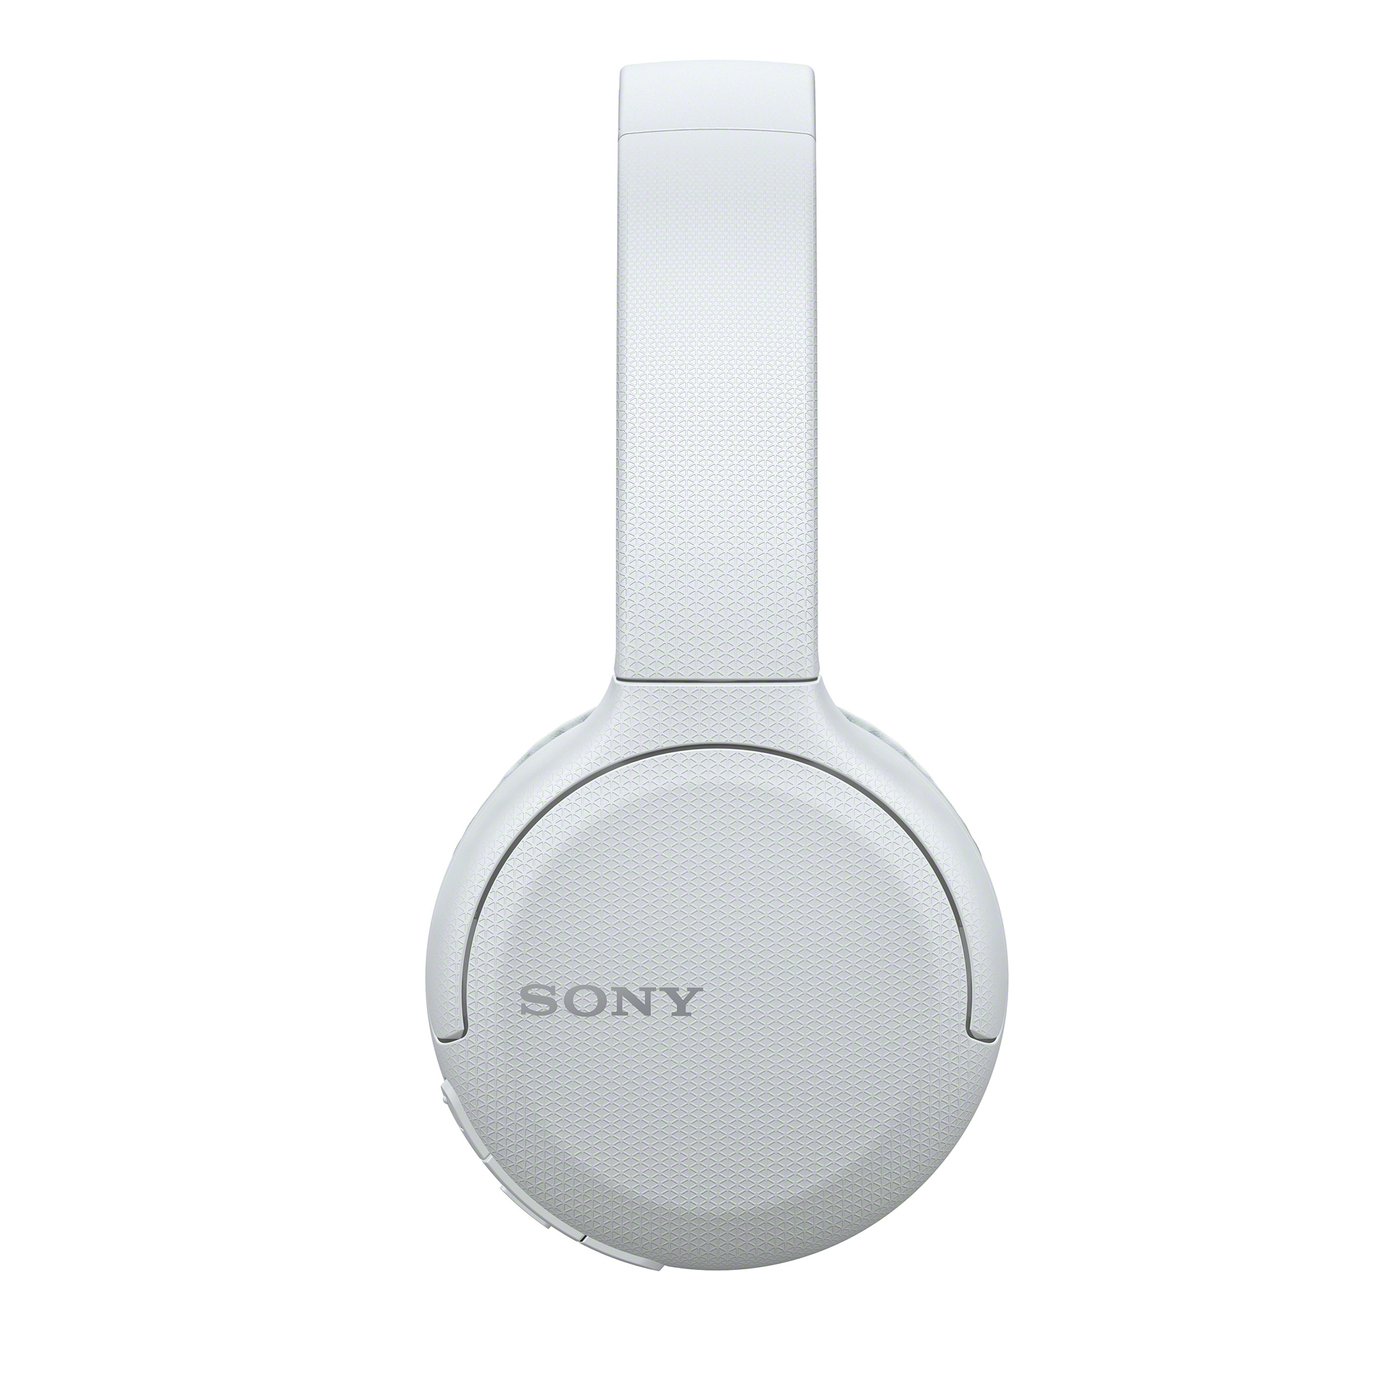 Sony WH-CH510 On-Ear Wireless Headphones Review